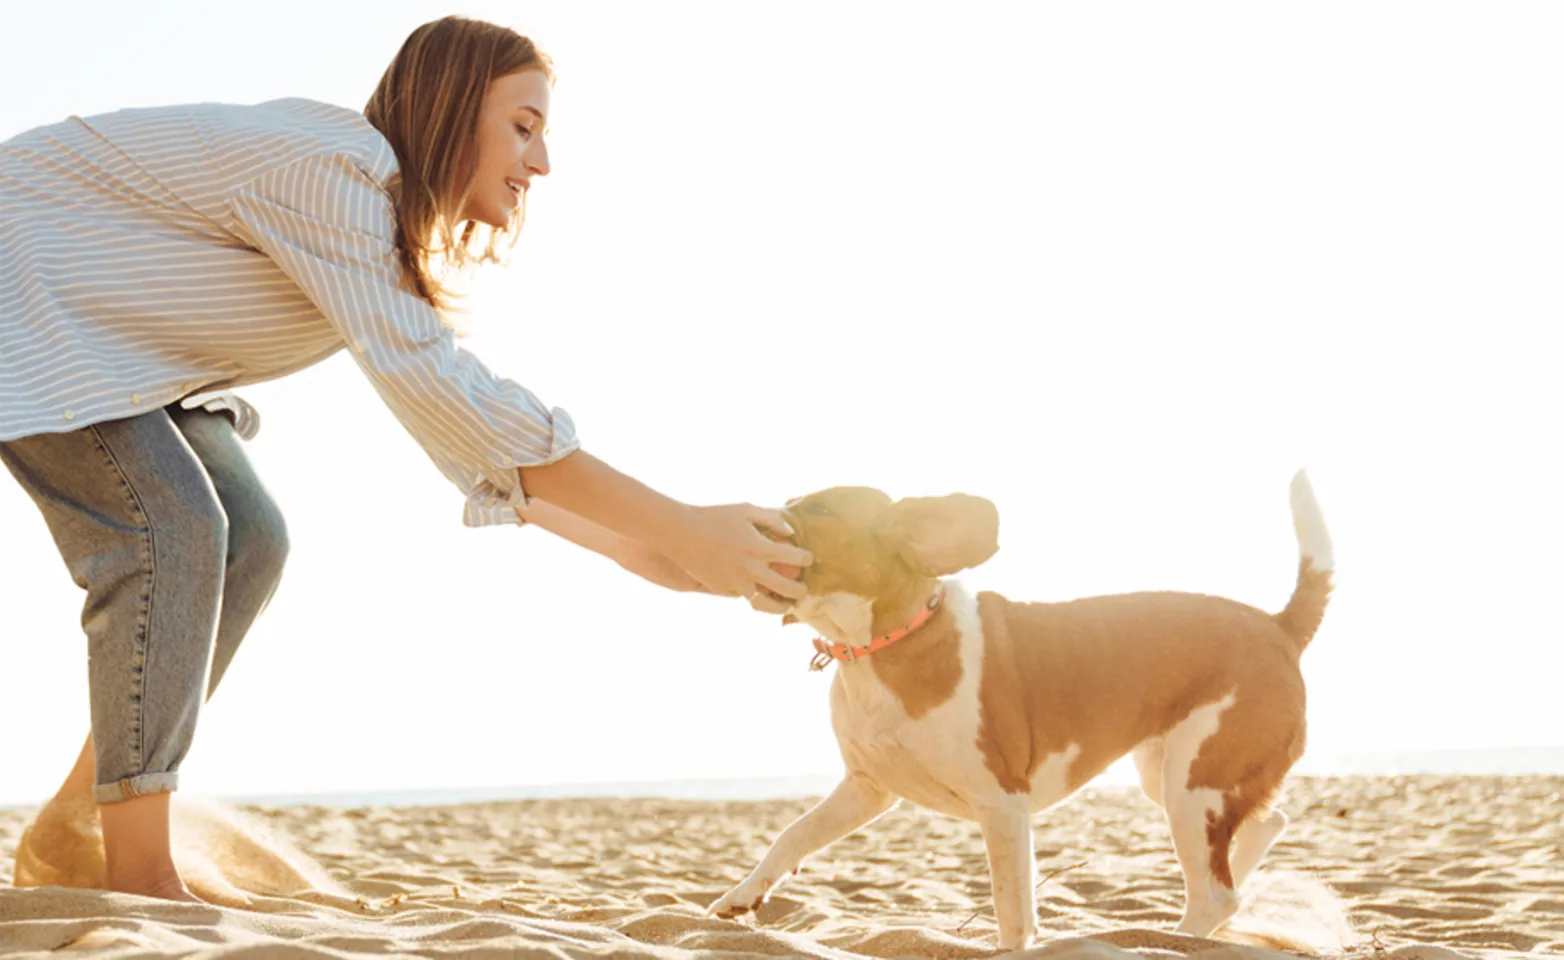 A woman playing with her dog on a beach